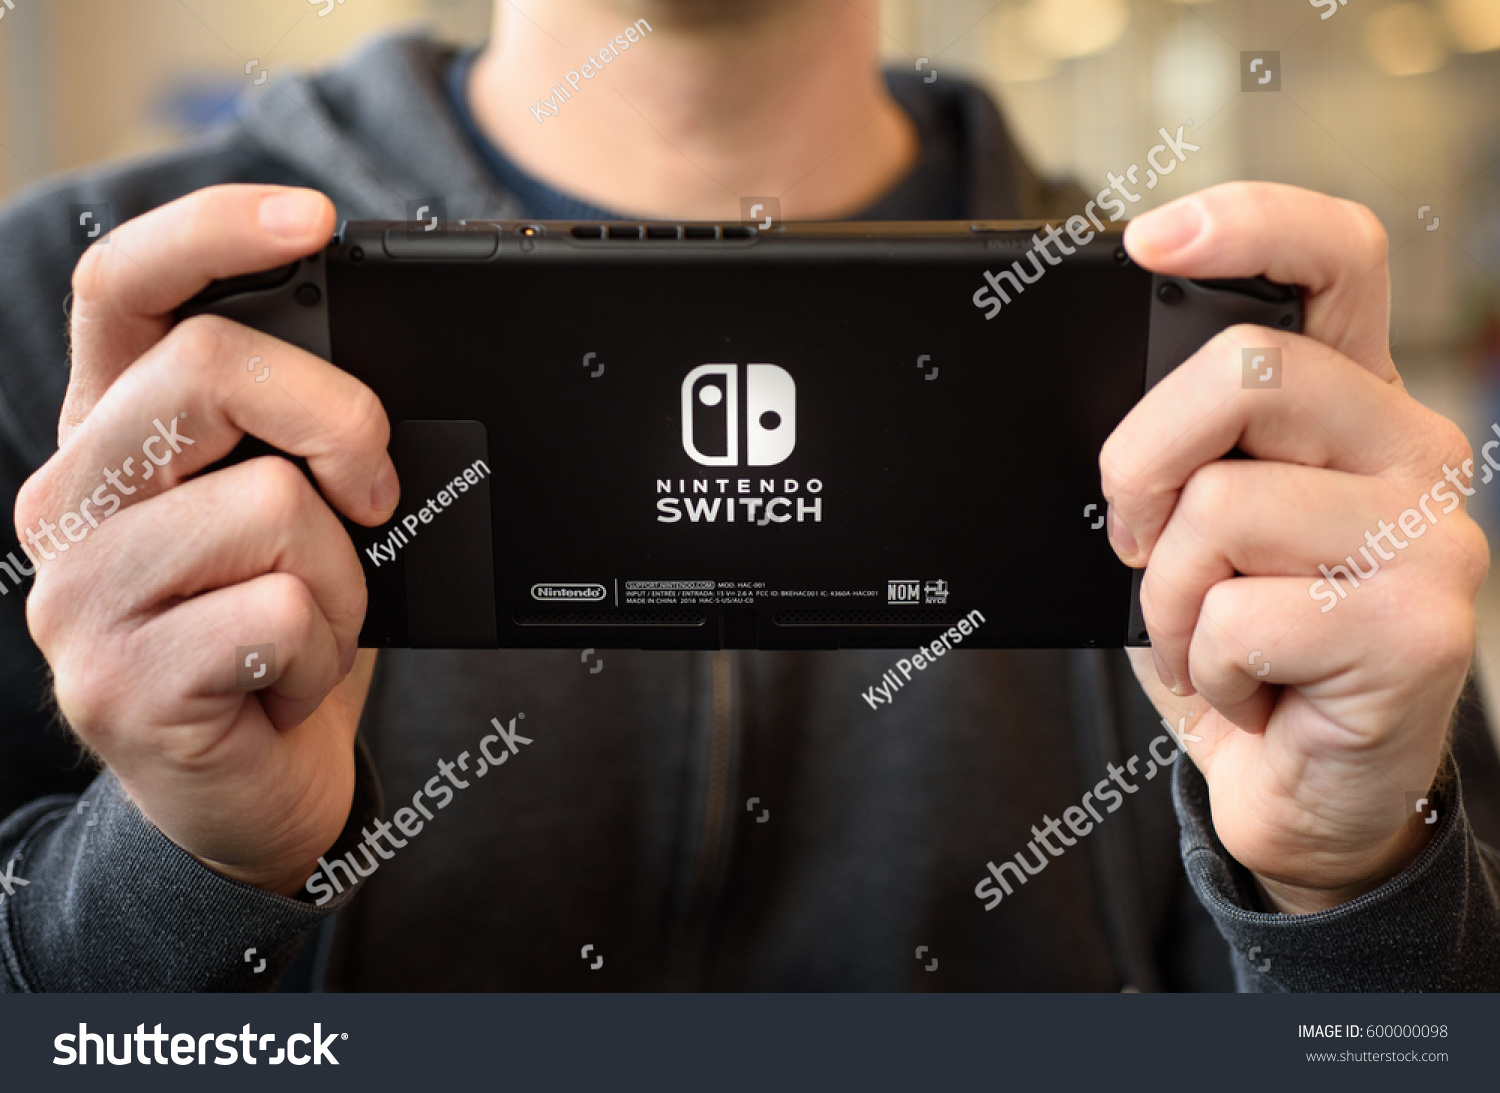 nintendo switch in stock usa